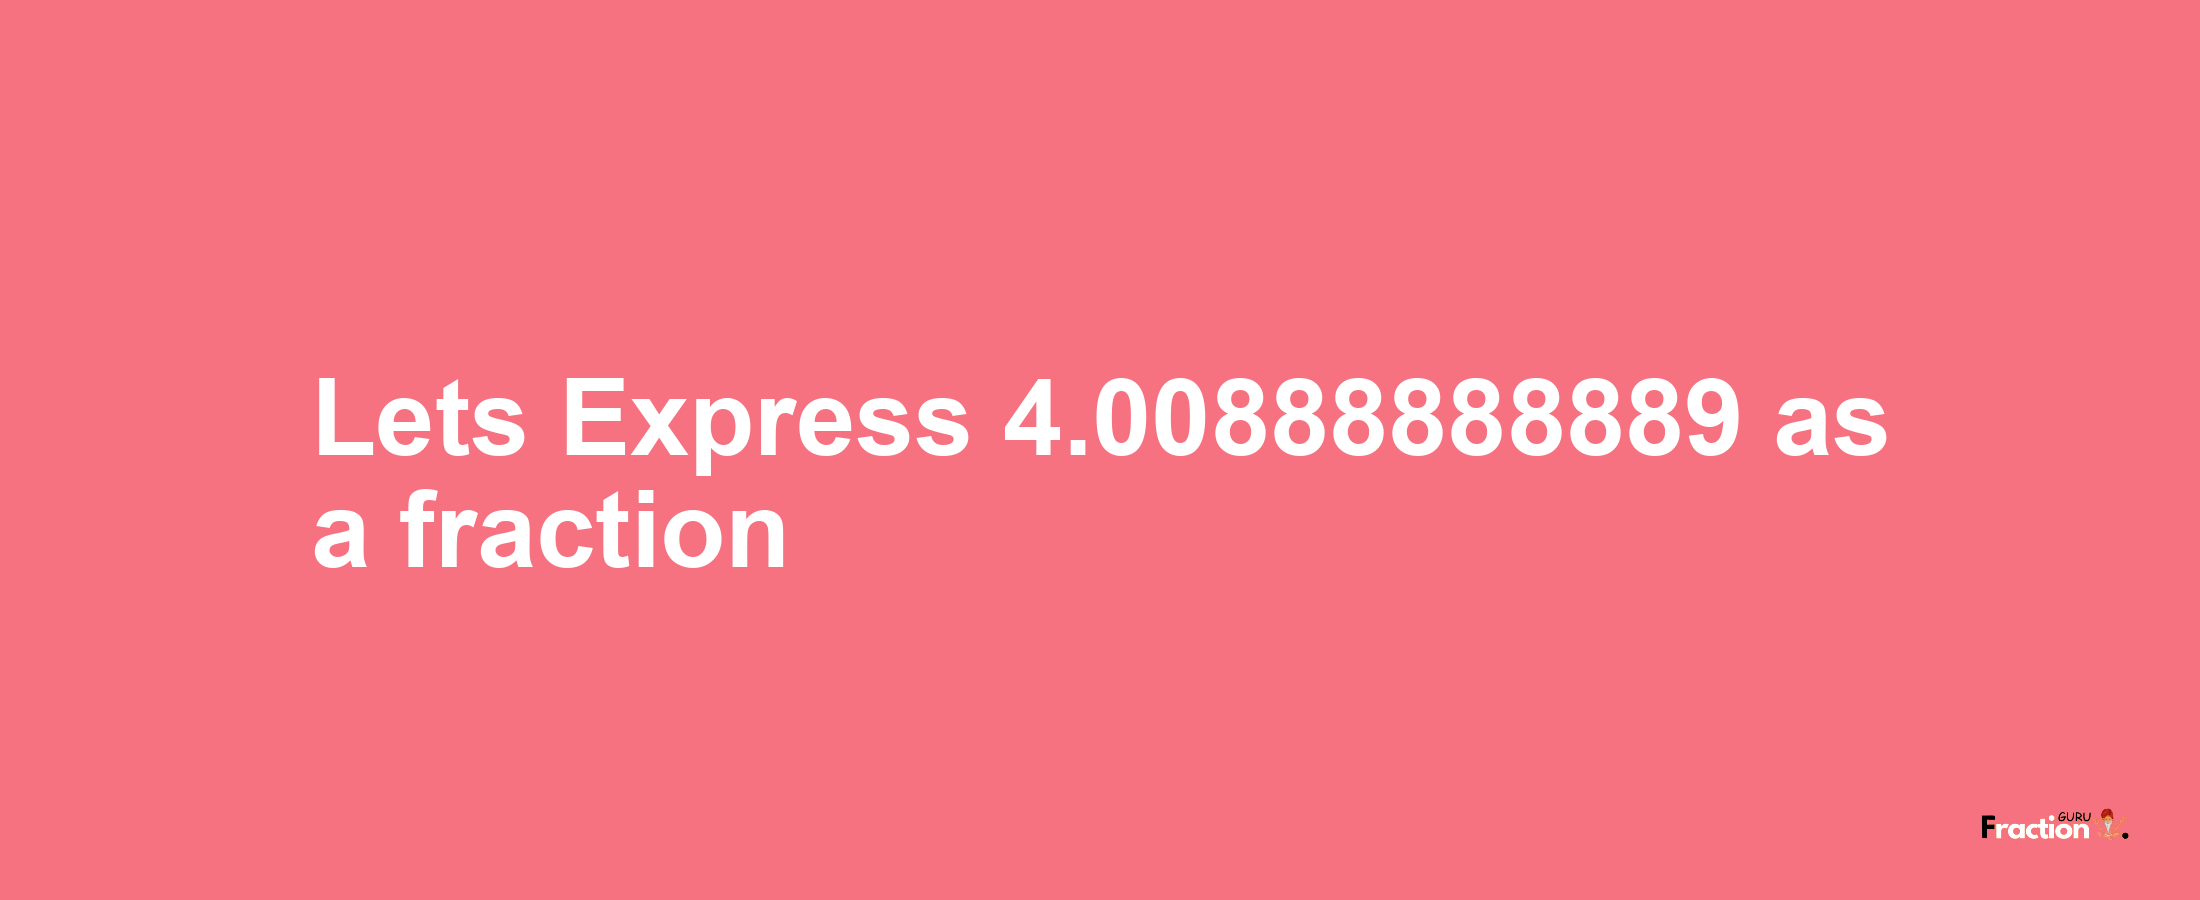 Lets Express 4.00888888889 as afraction